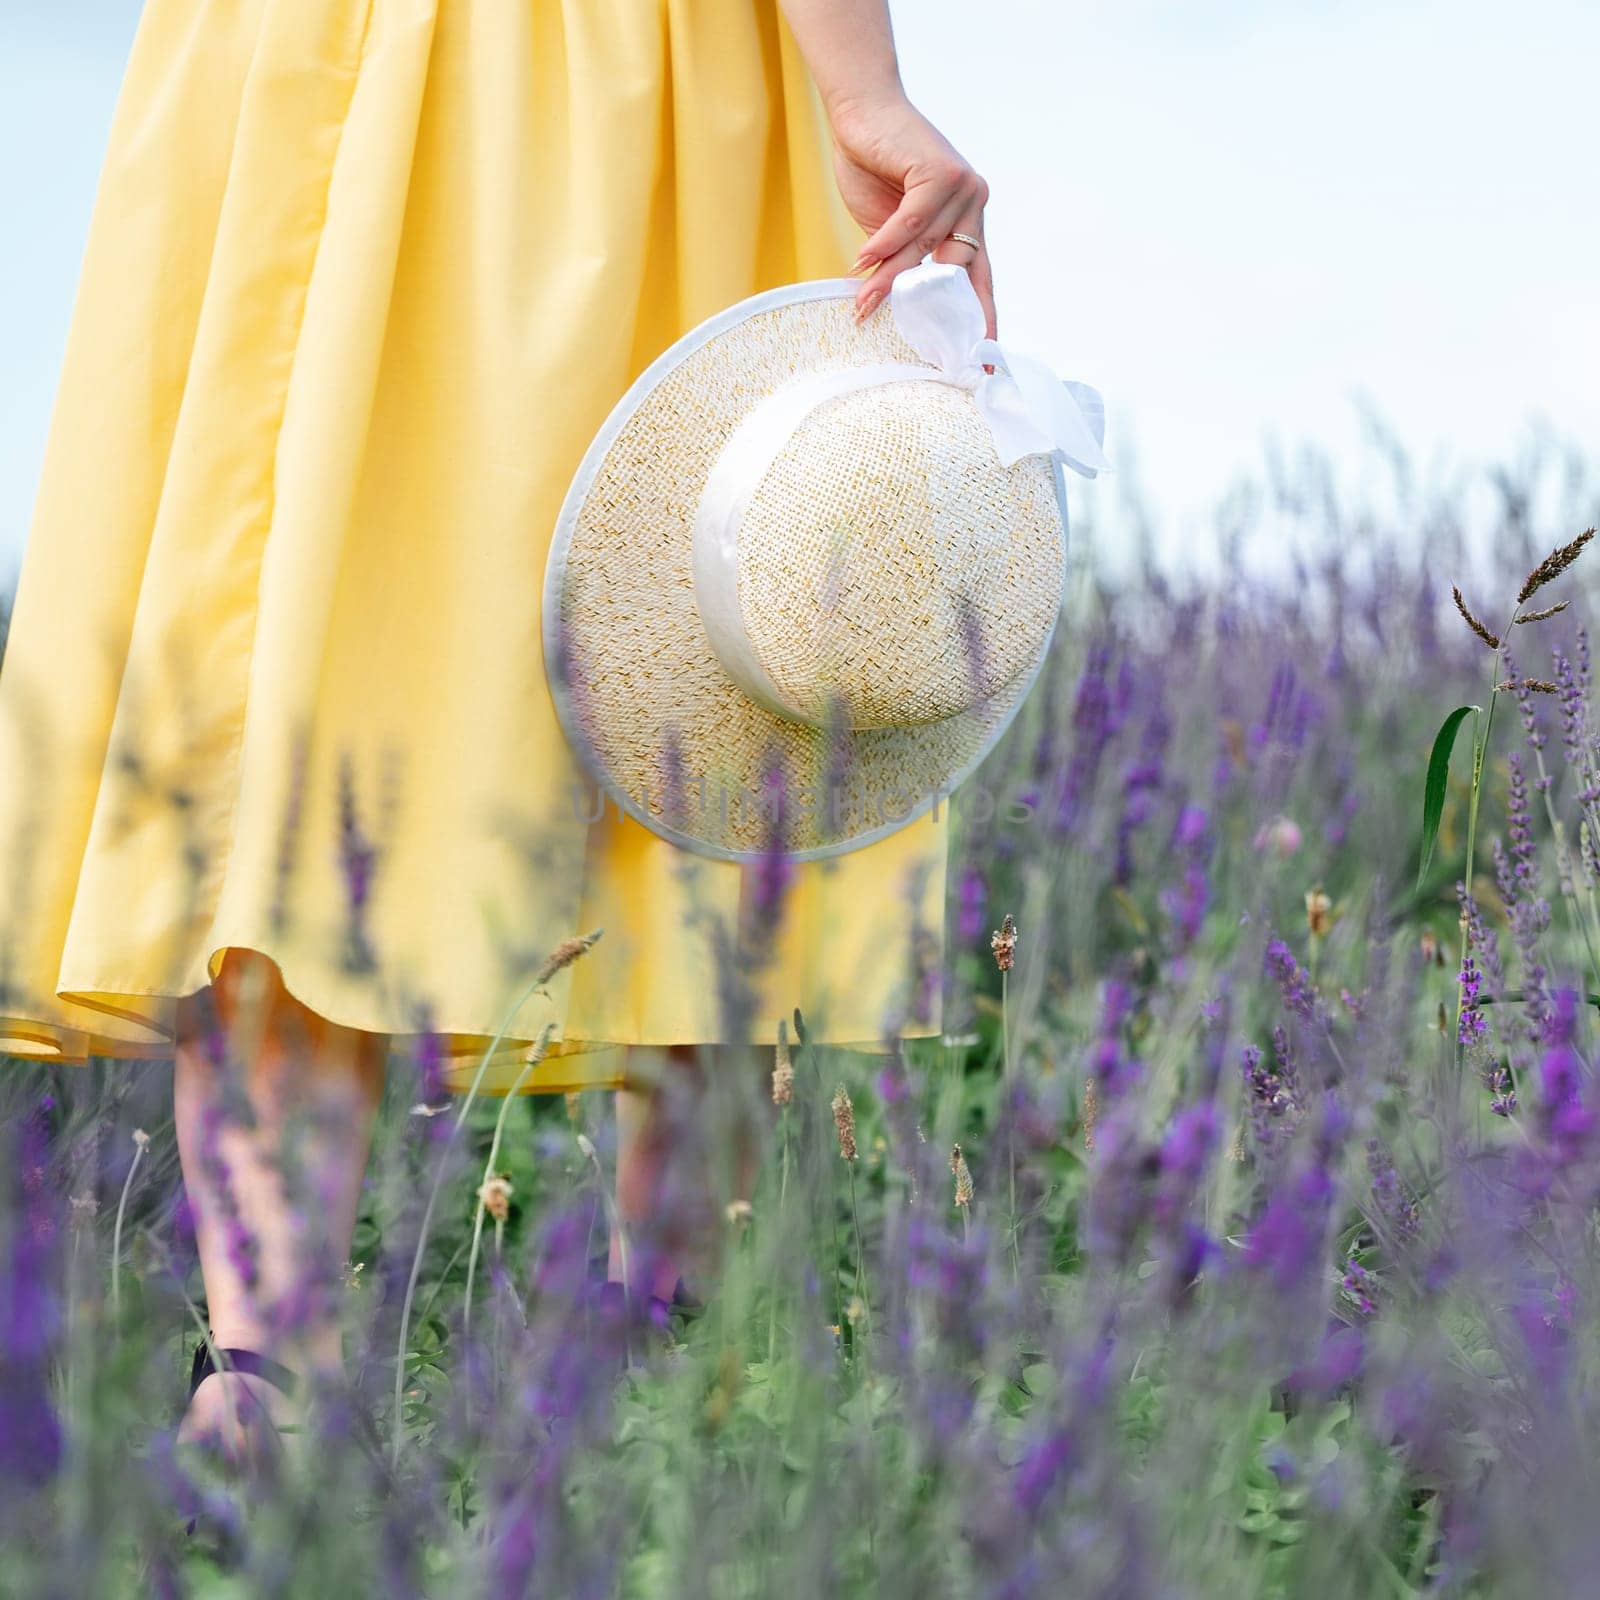 A girl in a yellow dress walks in a lavender field, a young girl between lavender bushes.